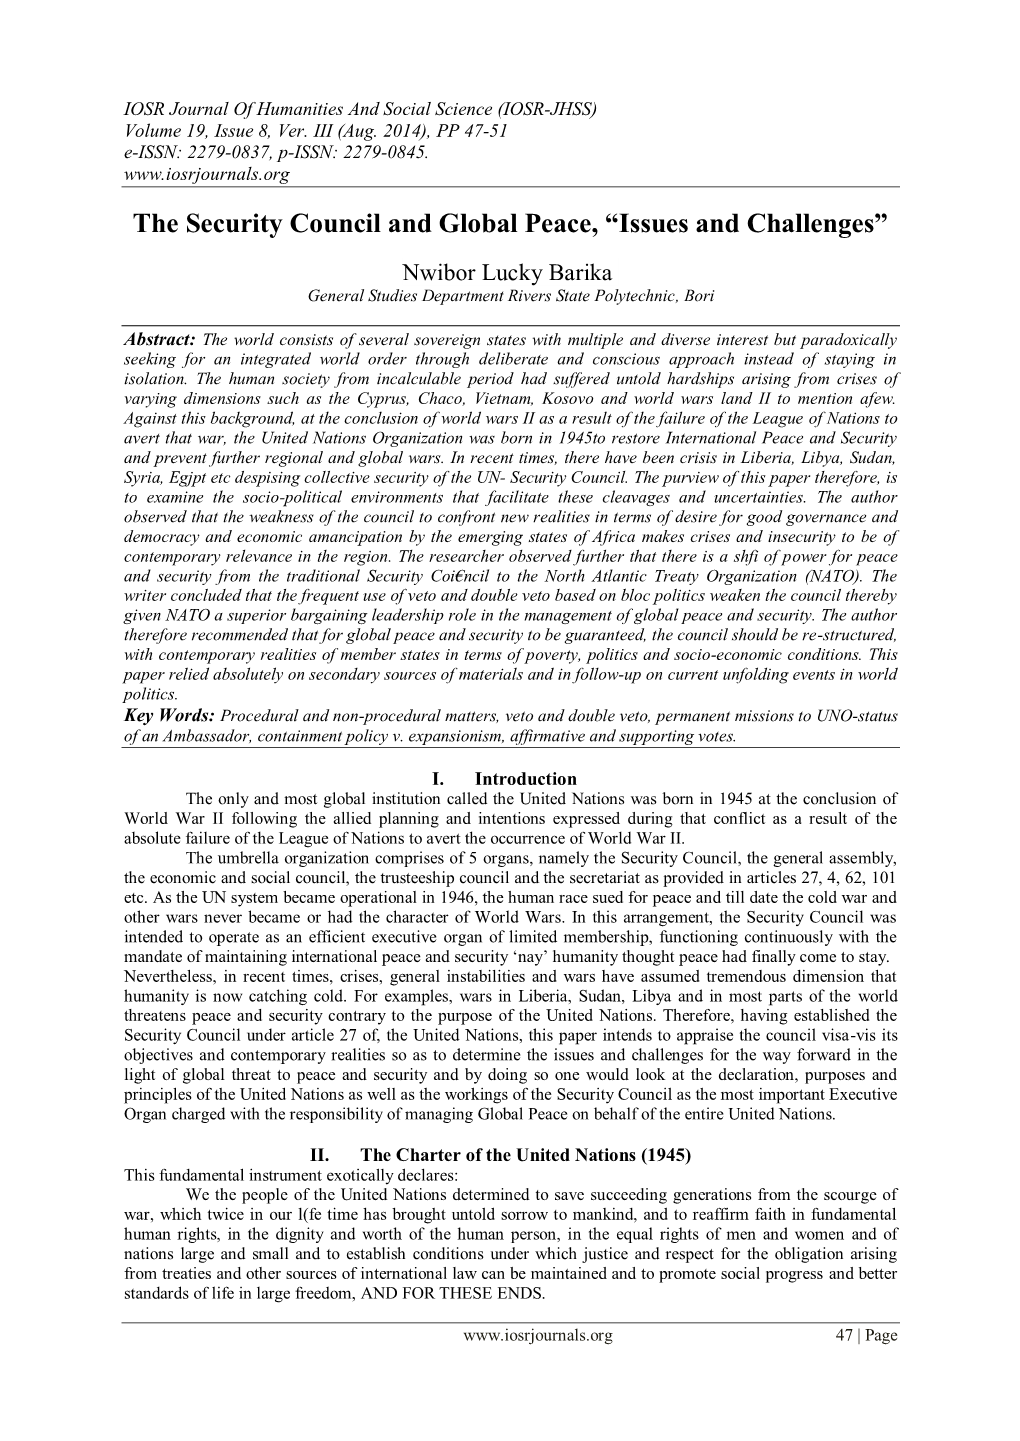 The Security Council and Global Peace, “Issues and Challenges”